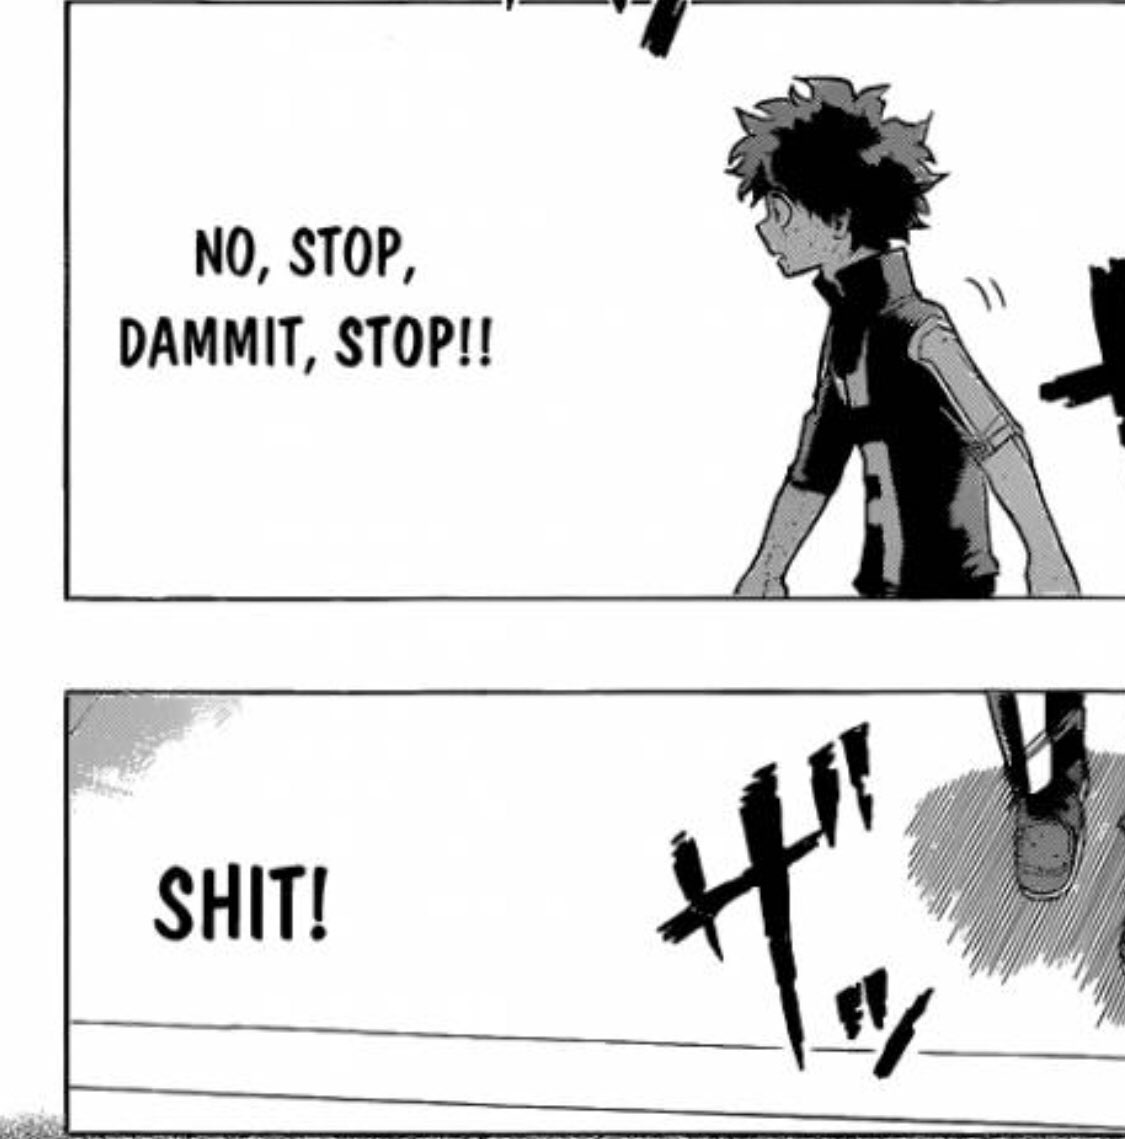 In the original panel he said “chikushou!!Tomare!! Kuso!”. [Dammit!! Stop (impolite form), shit!!] While normally he’d probably say “iya da, tomatte, onegai” [no, stop (more polite form), please]